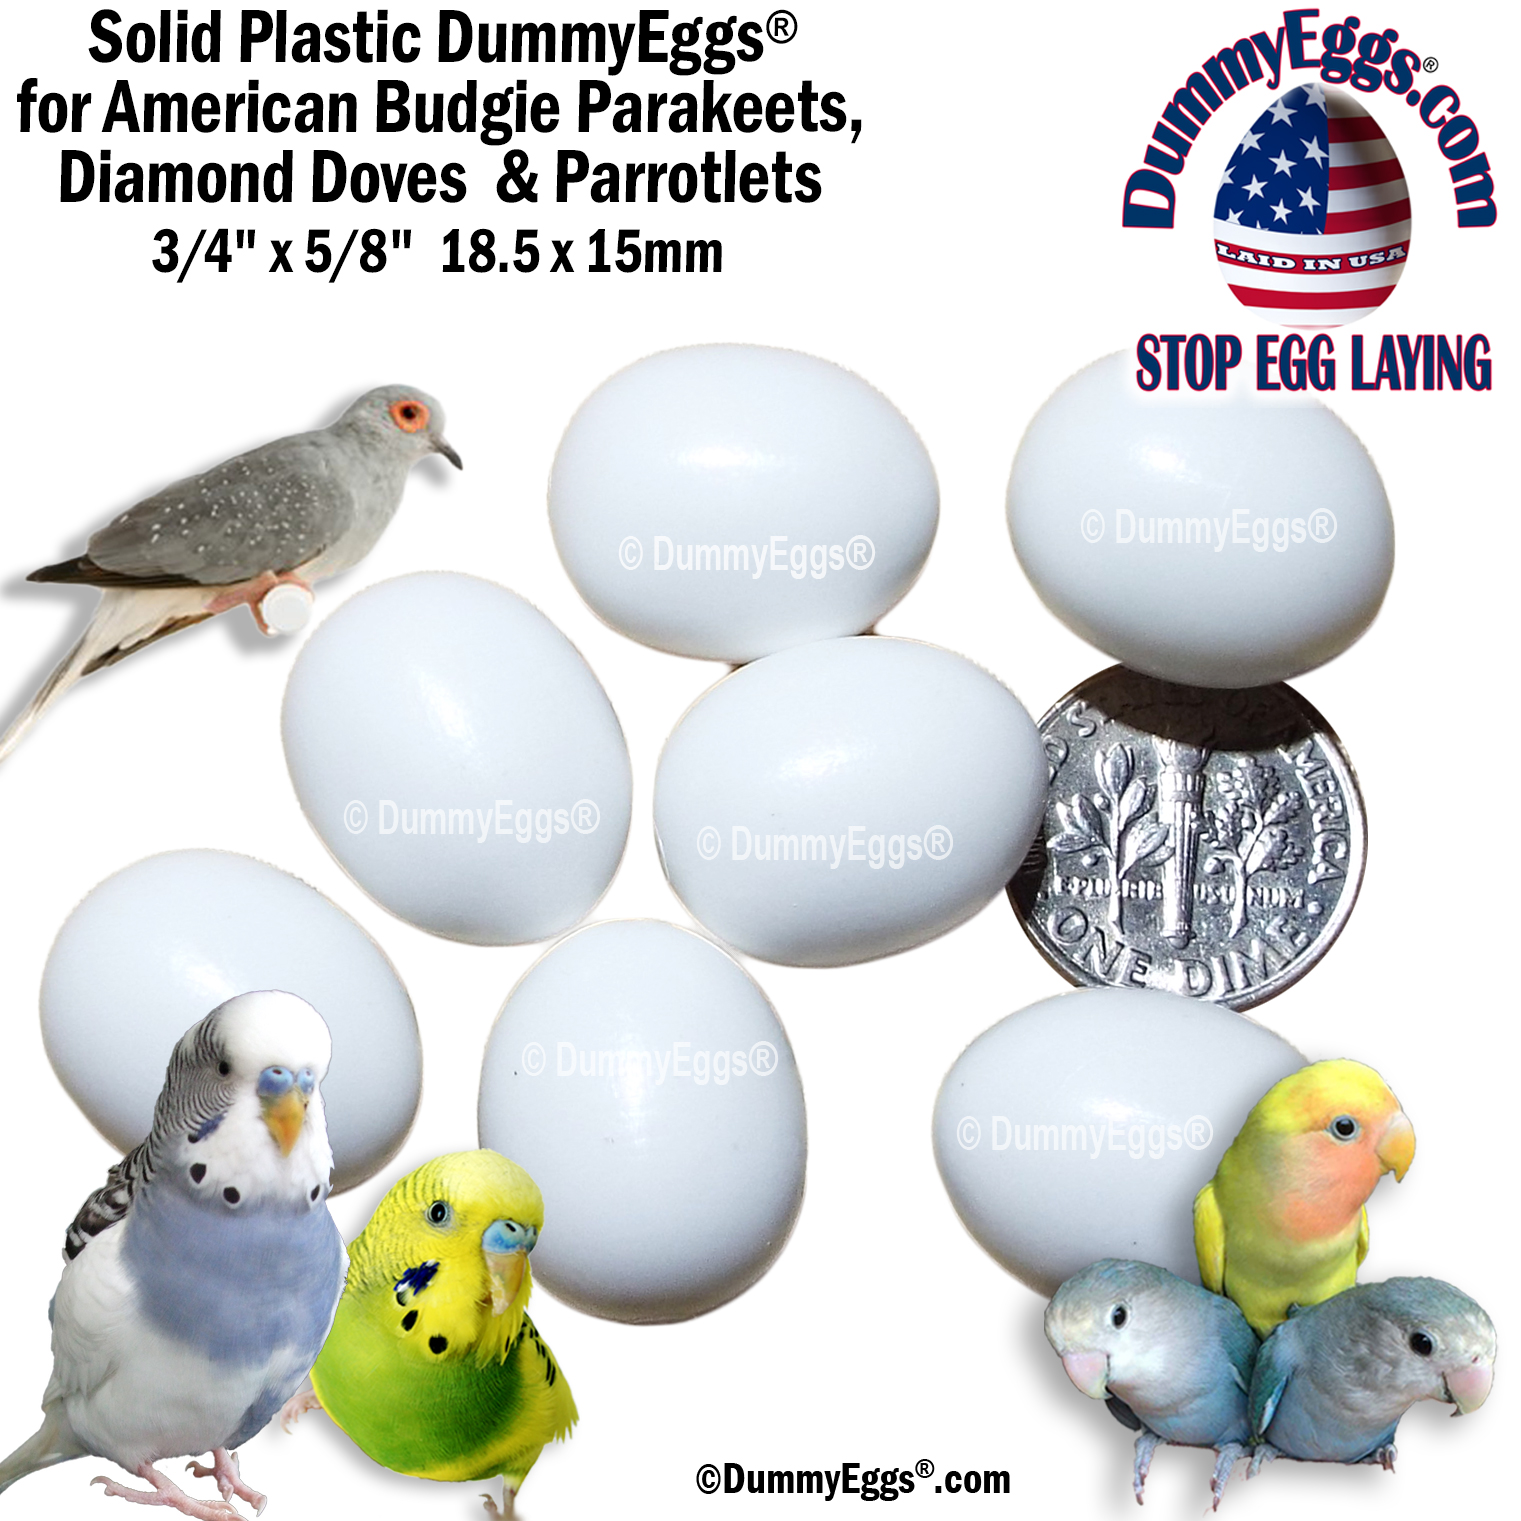 7 white plastic Budgie eggs with a dime in the center for scale. On the right a beautiful green and yellow american budgie parakeet and on the left a grey Diamond Dove with red eye ring and 2 blue Parrotlets below. Also shown are the DummyEggs.com logo,  and the 1/2" x 11/16" dimensions.